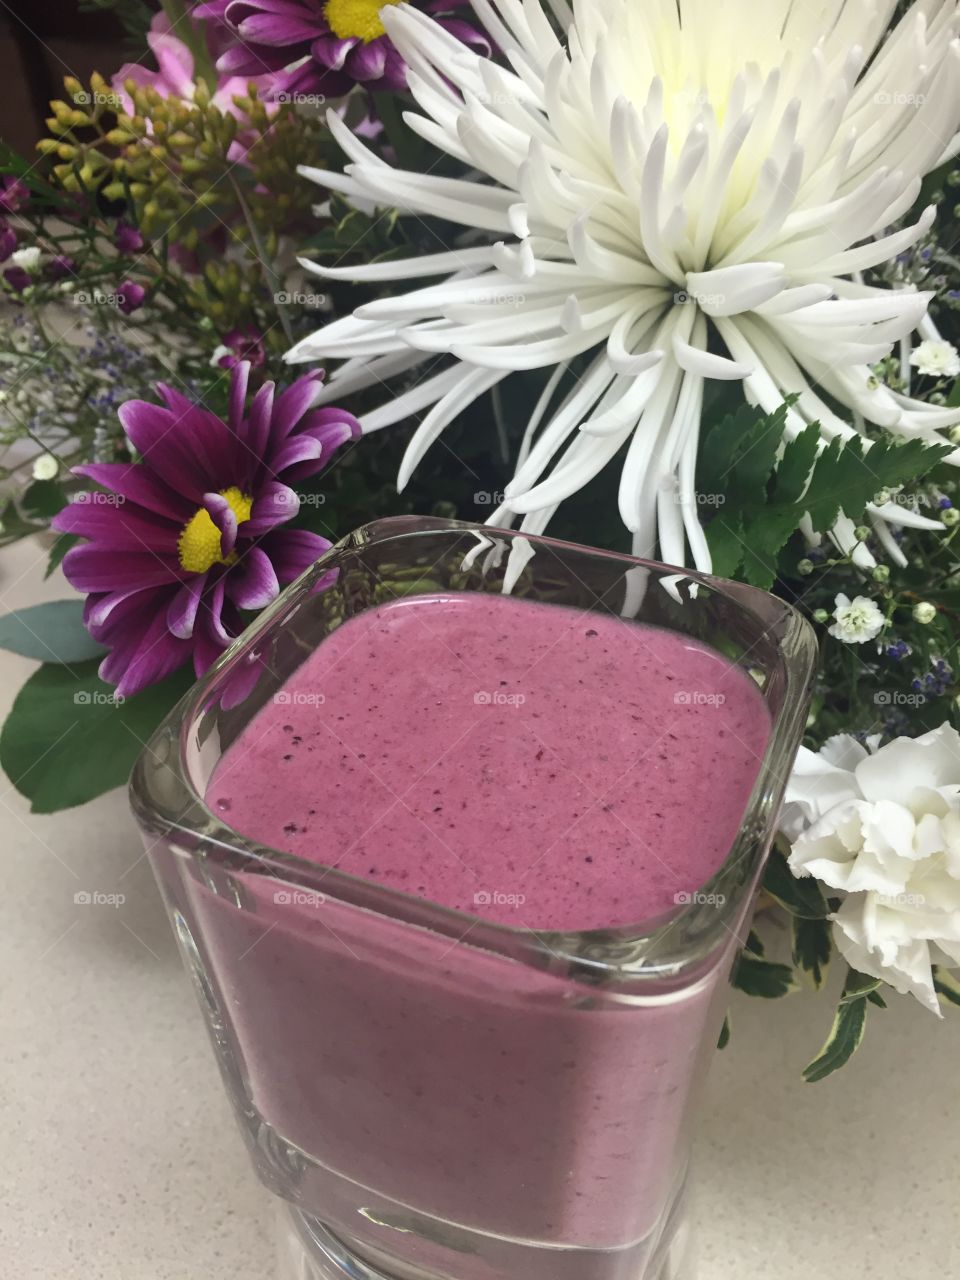 Berry smoothie with flower background
